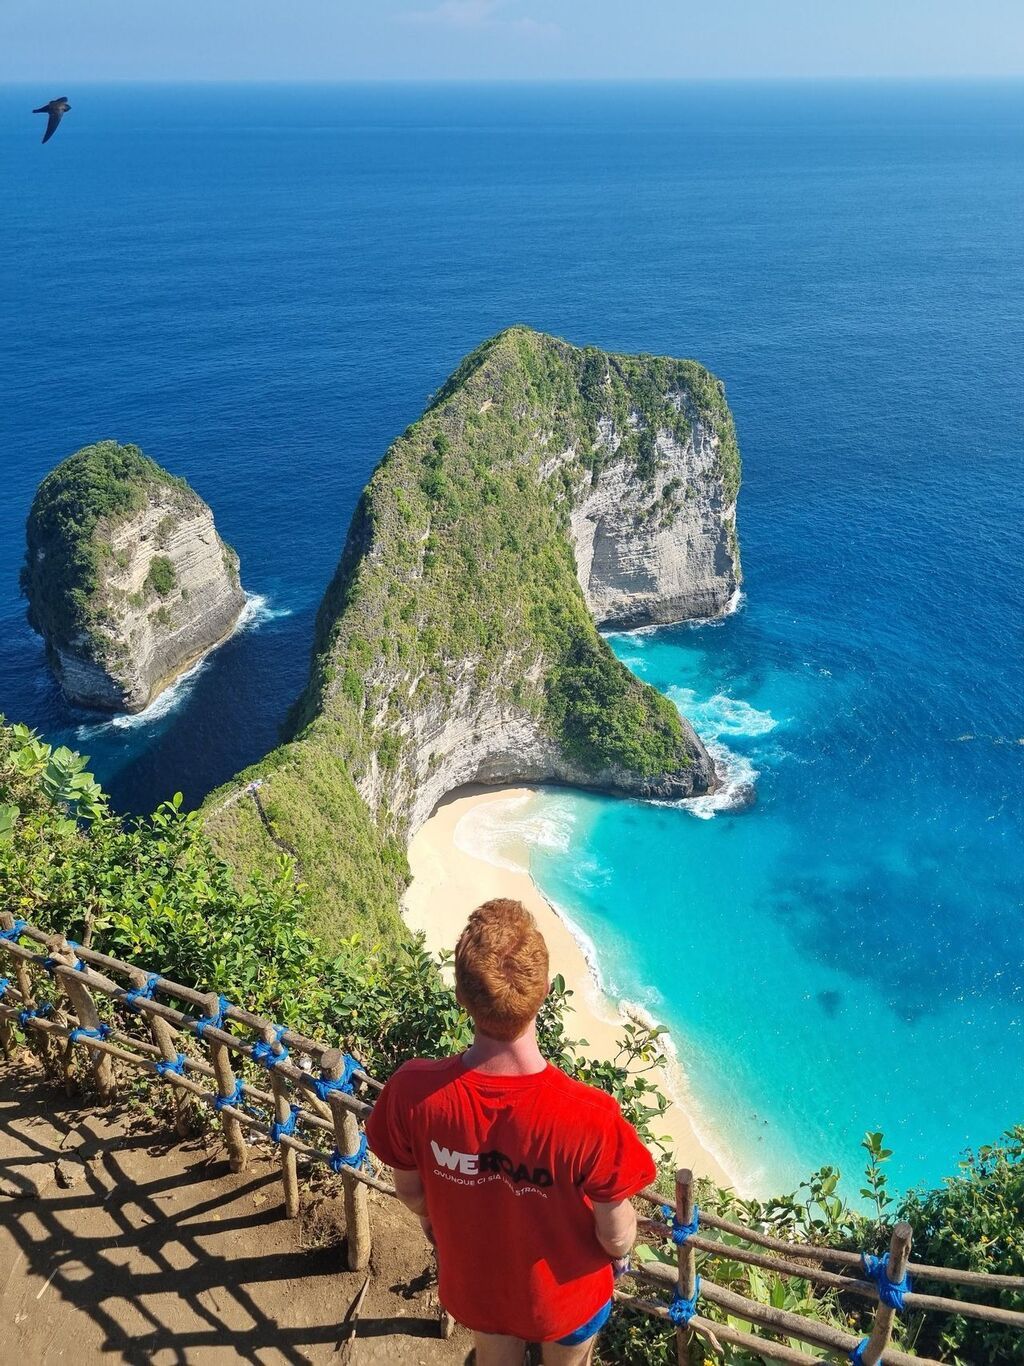 A person wearing a red WeRoad t-shirt overlooking the stunning Kelingking Beach on Nusa Penida, Bali